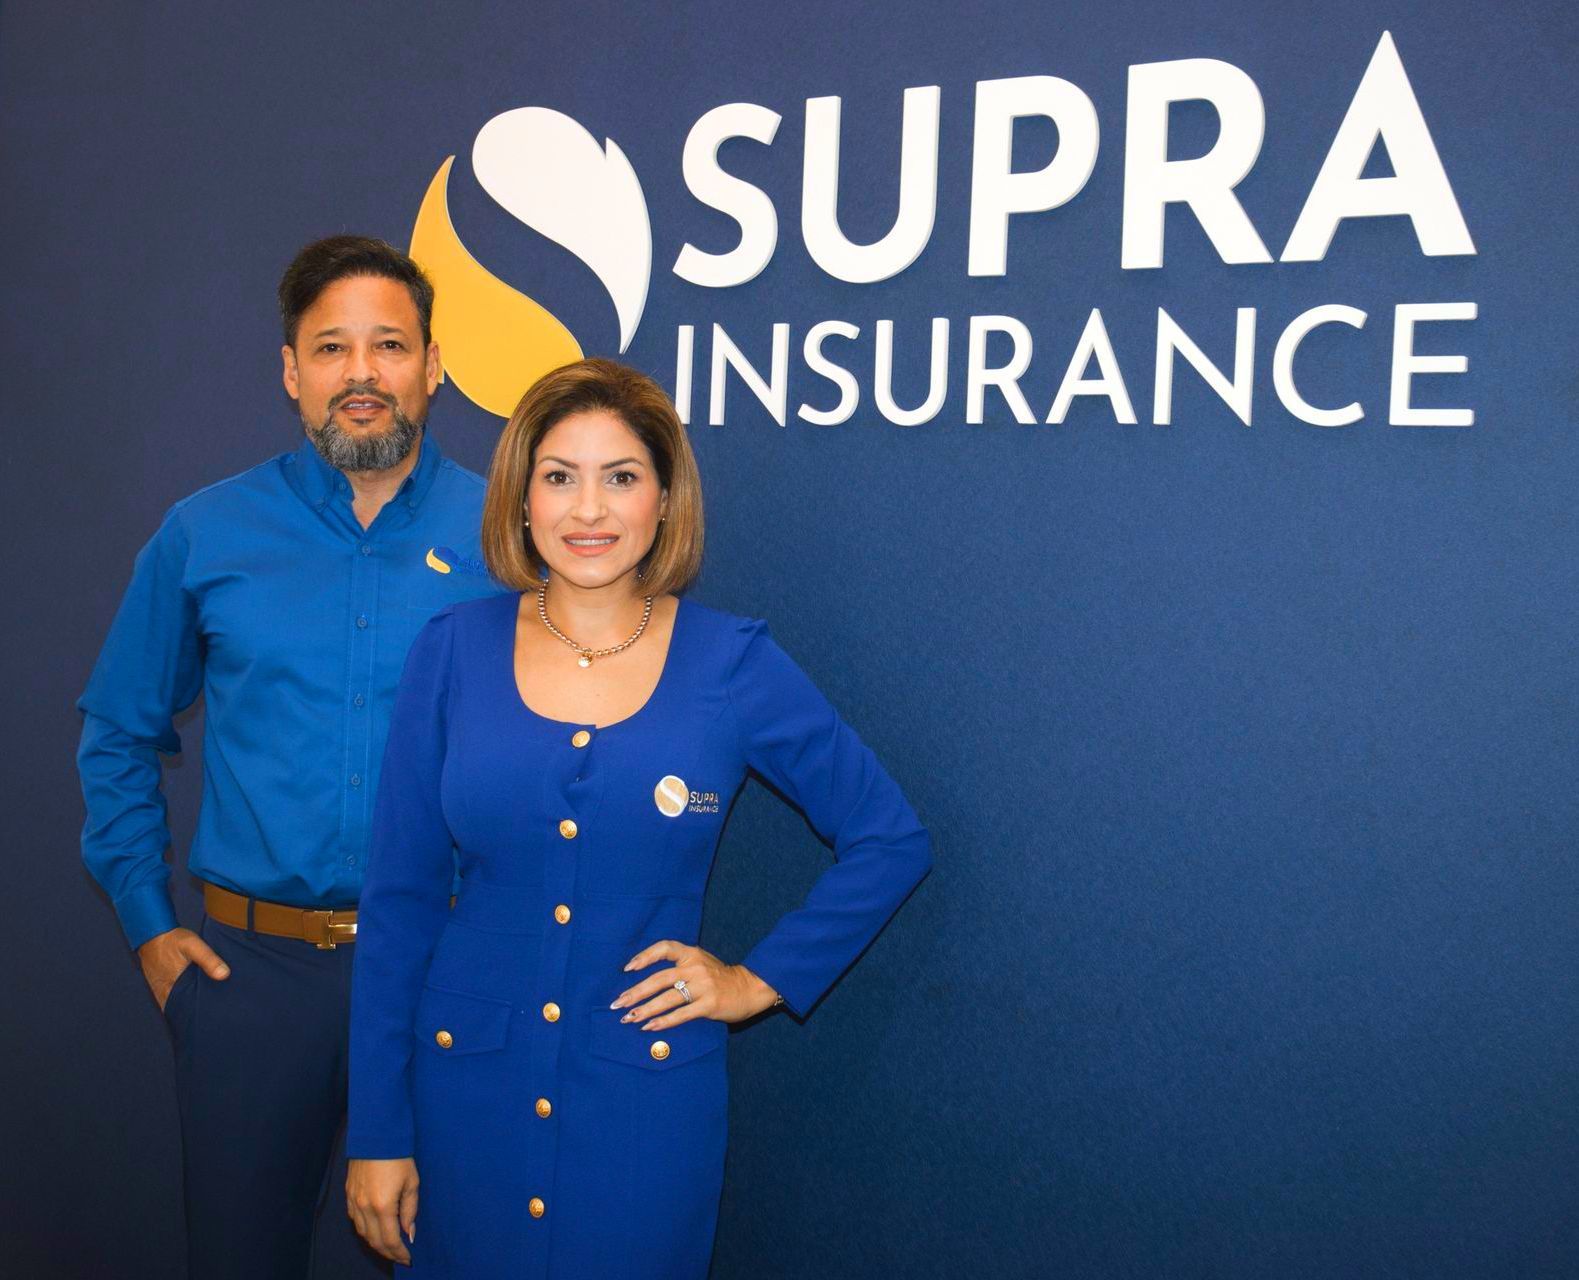 A man and a woman are standing in front of a supra insurance sign.